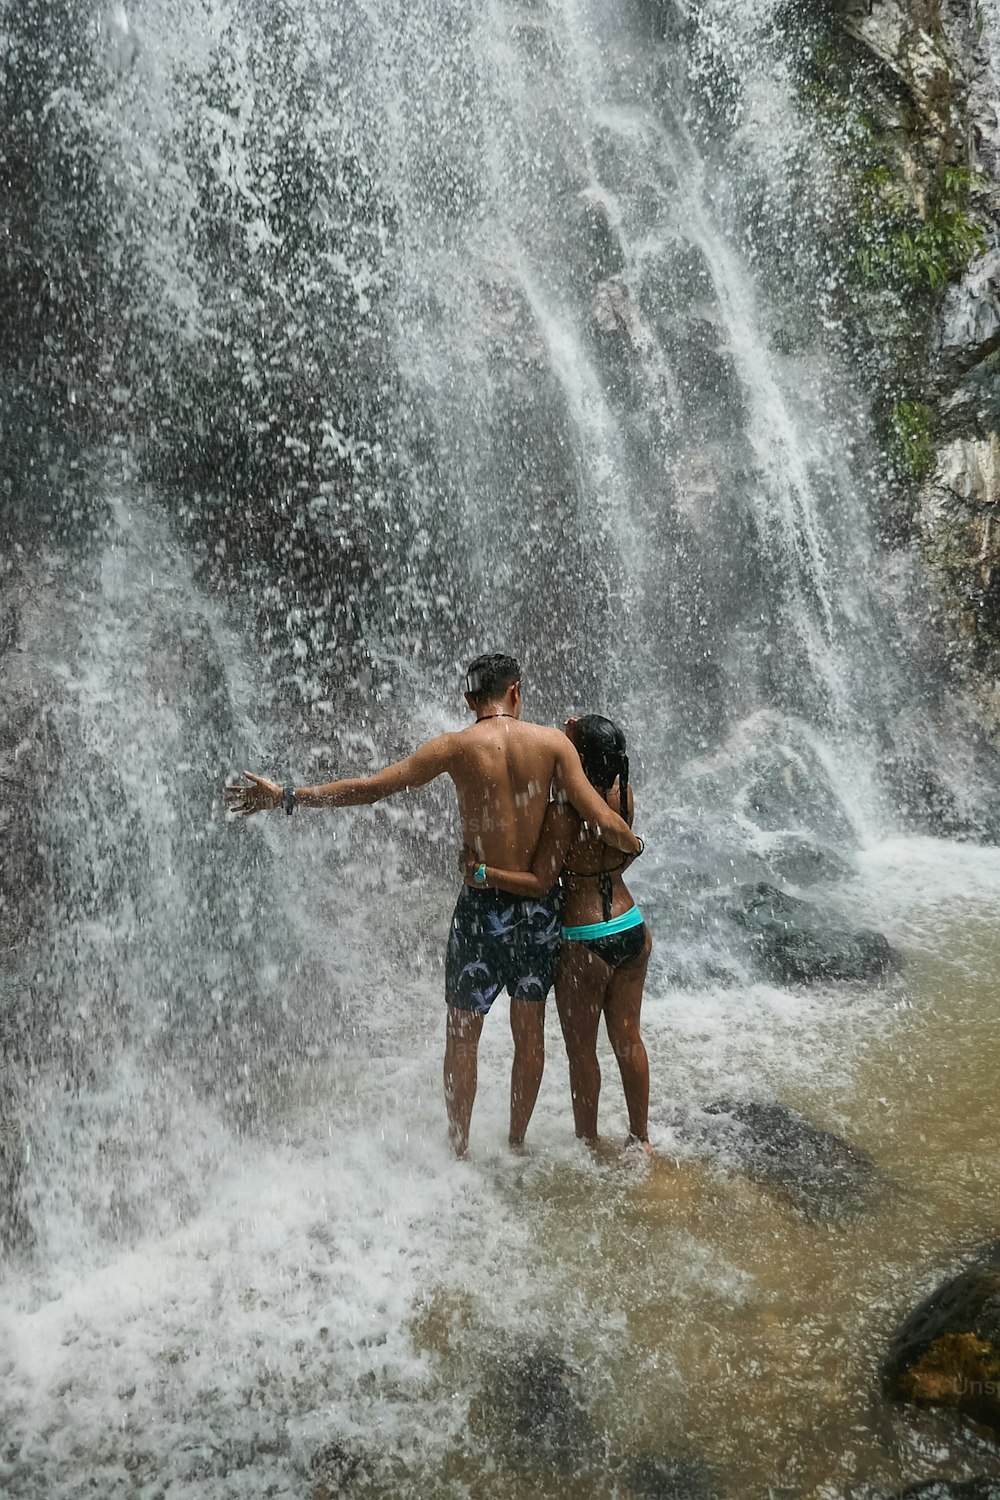 Boyfriends under waterfall, on the bottom of rocks and river.